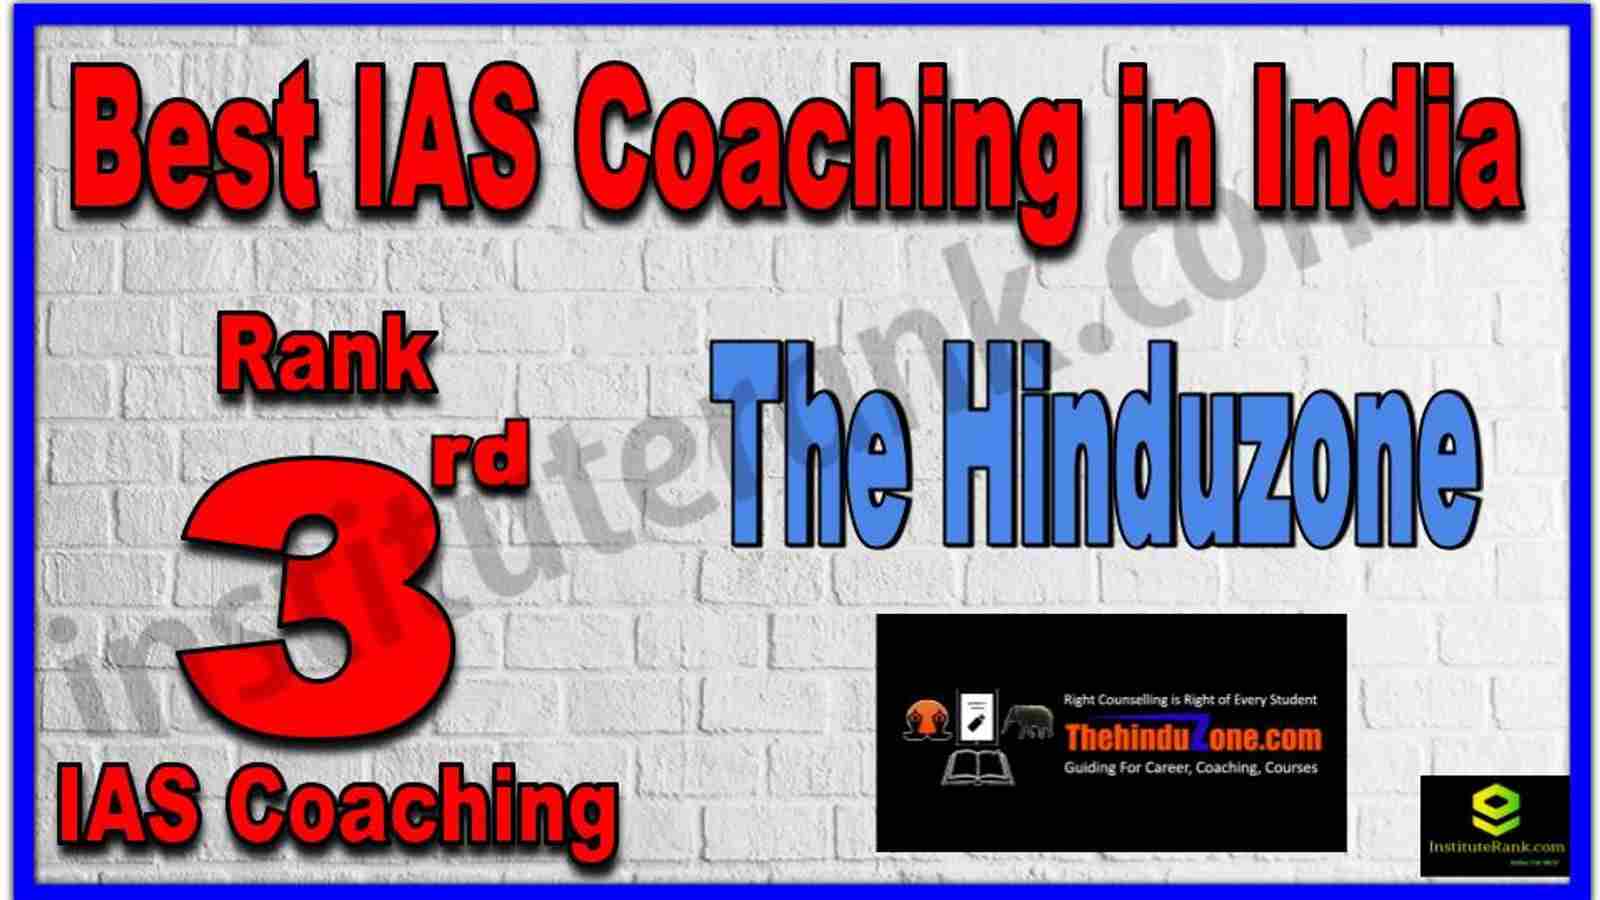 Rank 3rd Best IAS Coaching in India